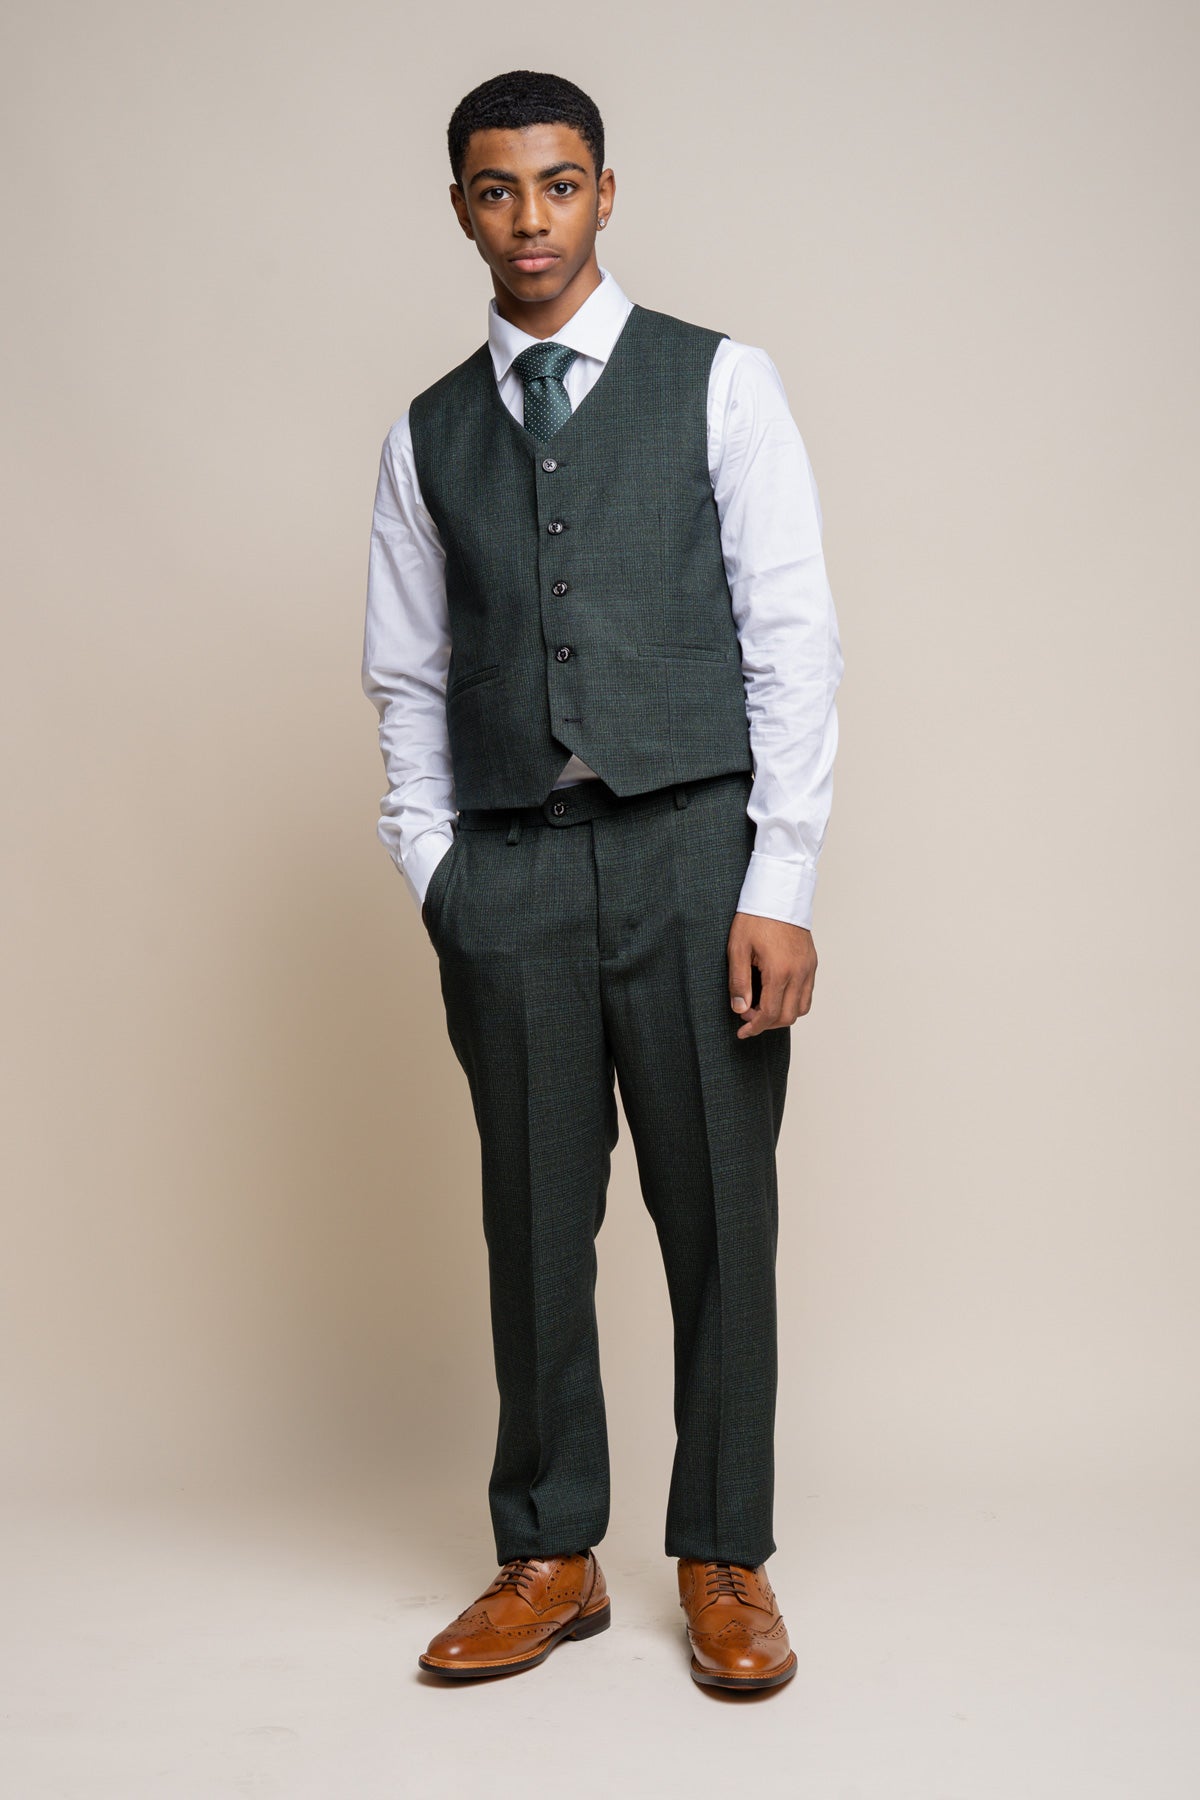 Caridi Olive Boys 3 Piece Wedding Suit – Swagger & Swoon